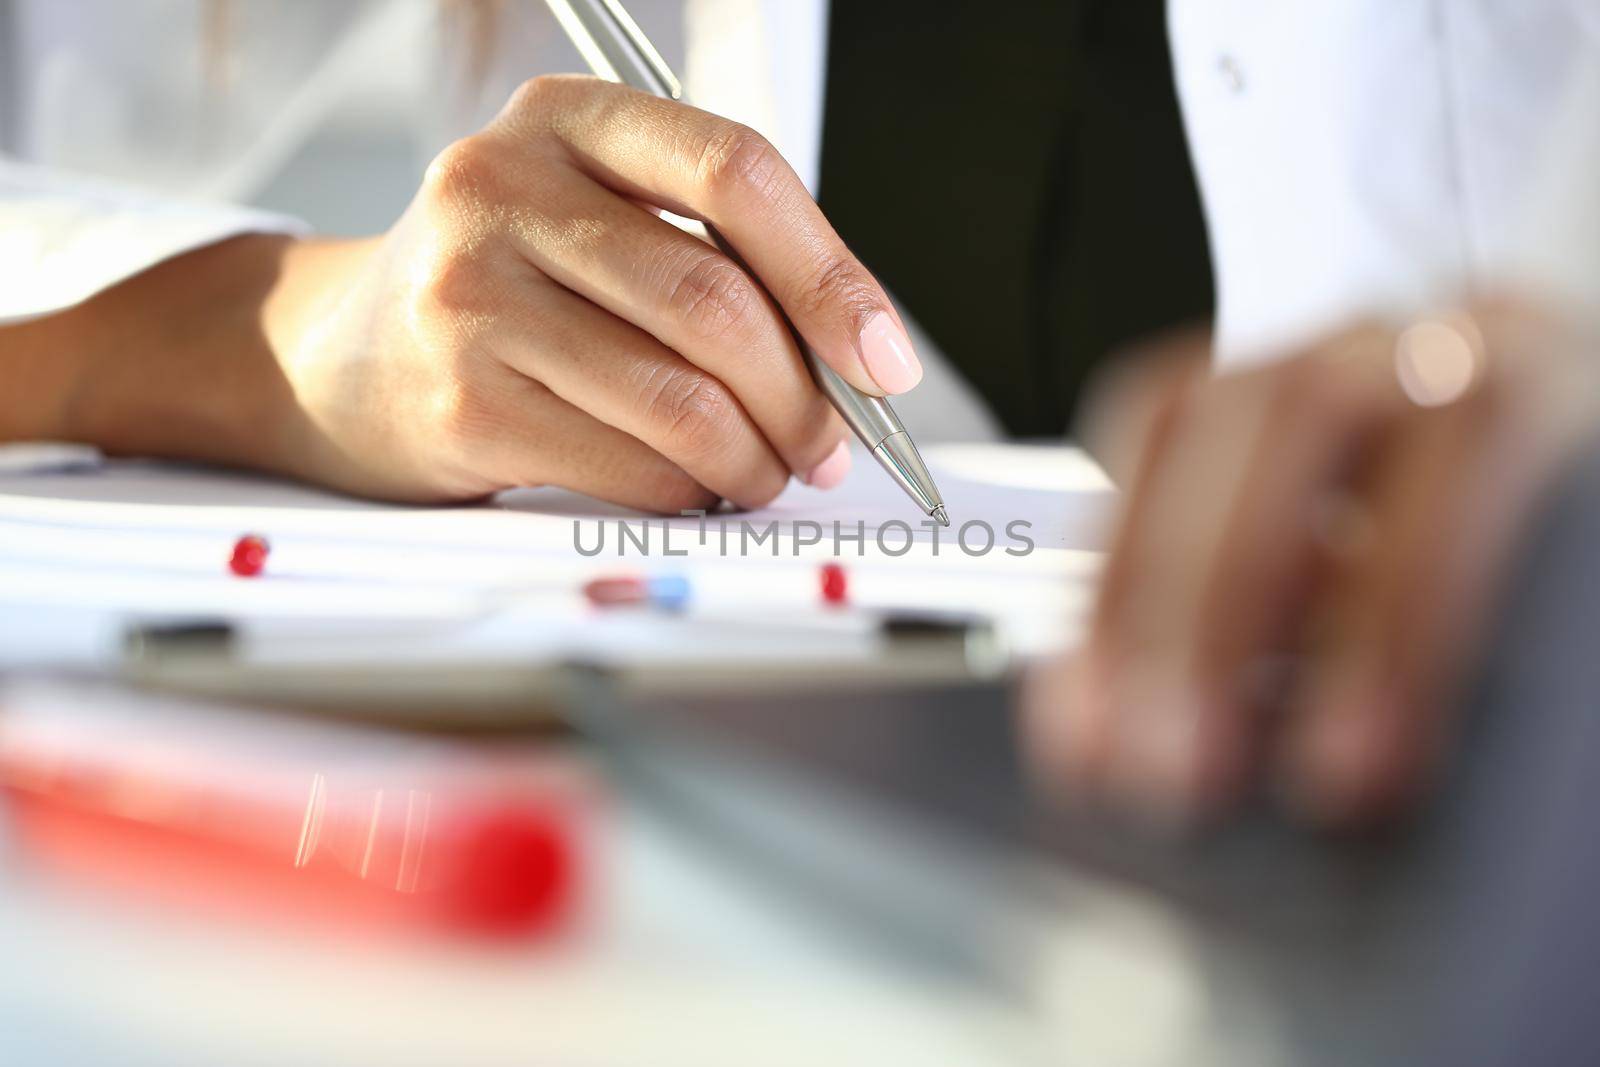 Female medicine doctor hand hold siver pen and write prescription to patient at worktable. Panacea and life save, prescribing treatment, legal drug store concept. Empty form ready to be used